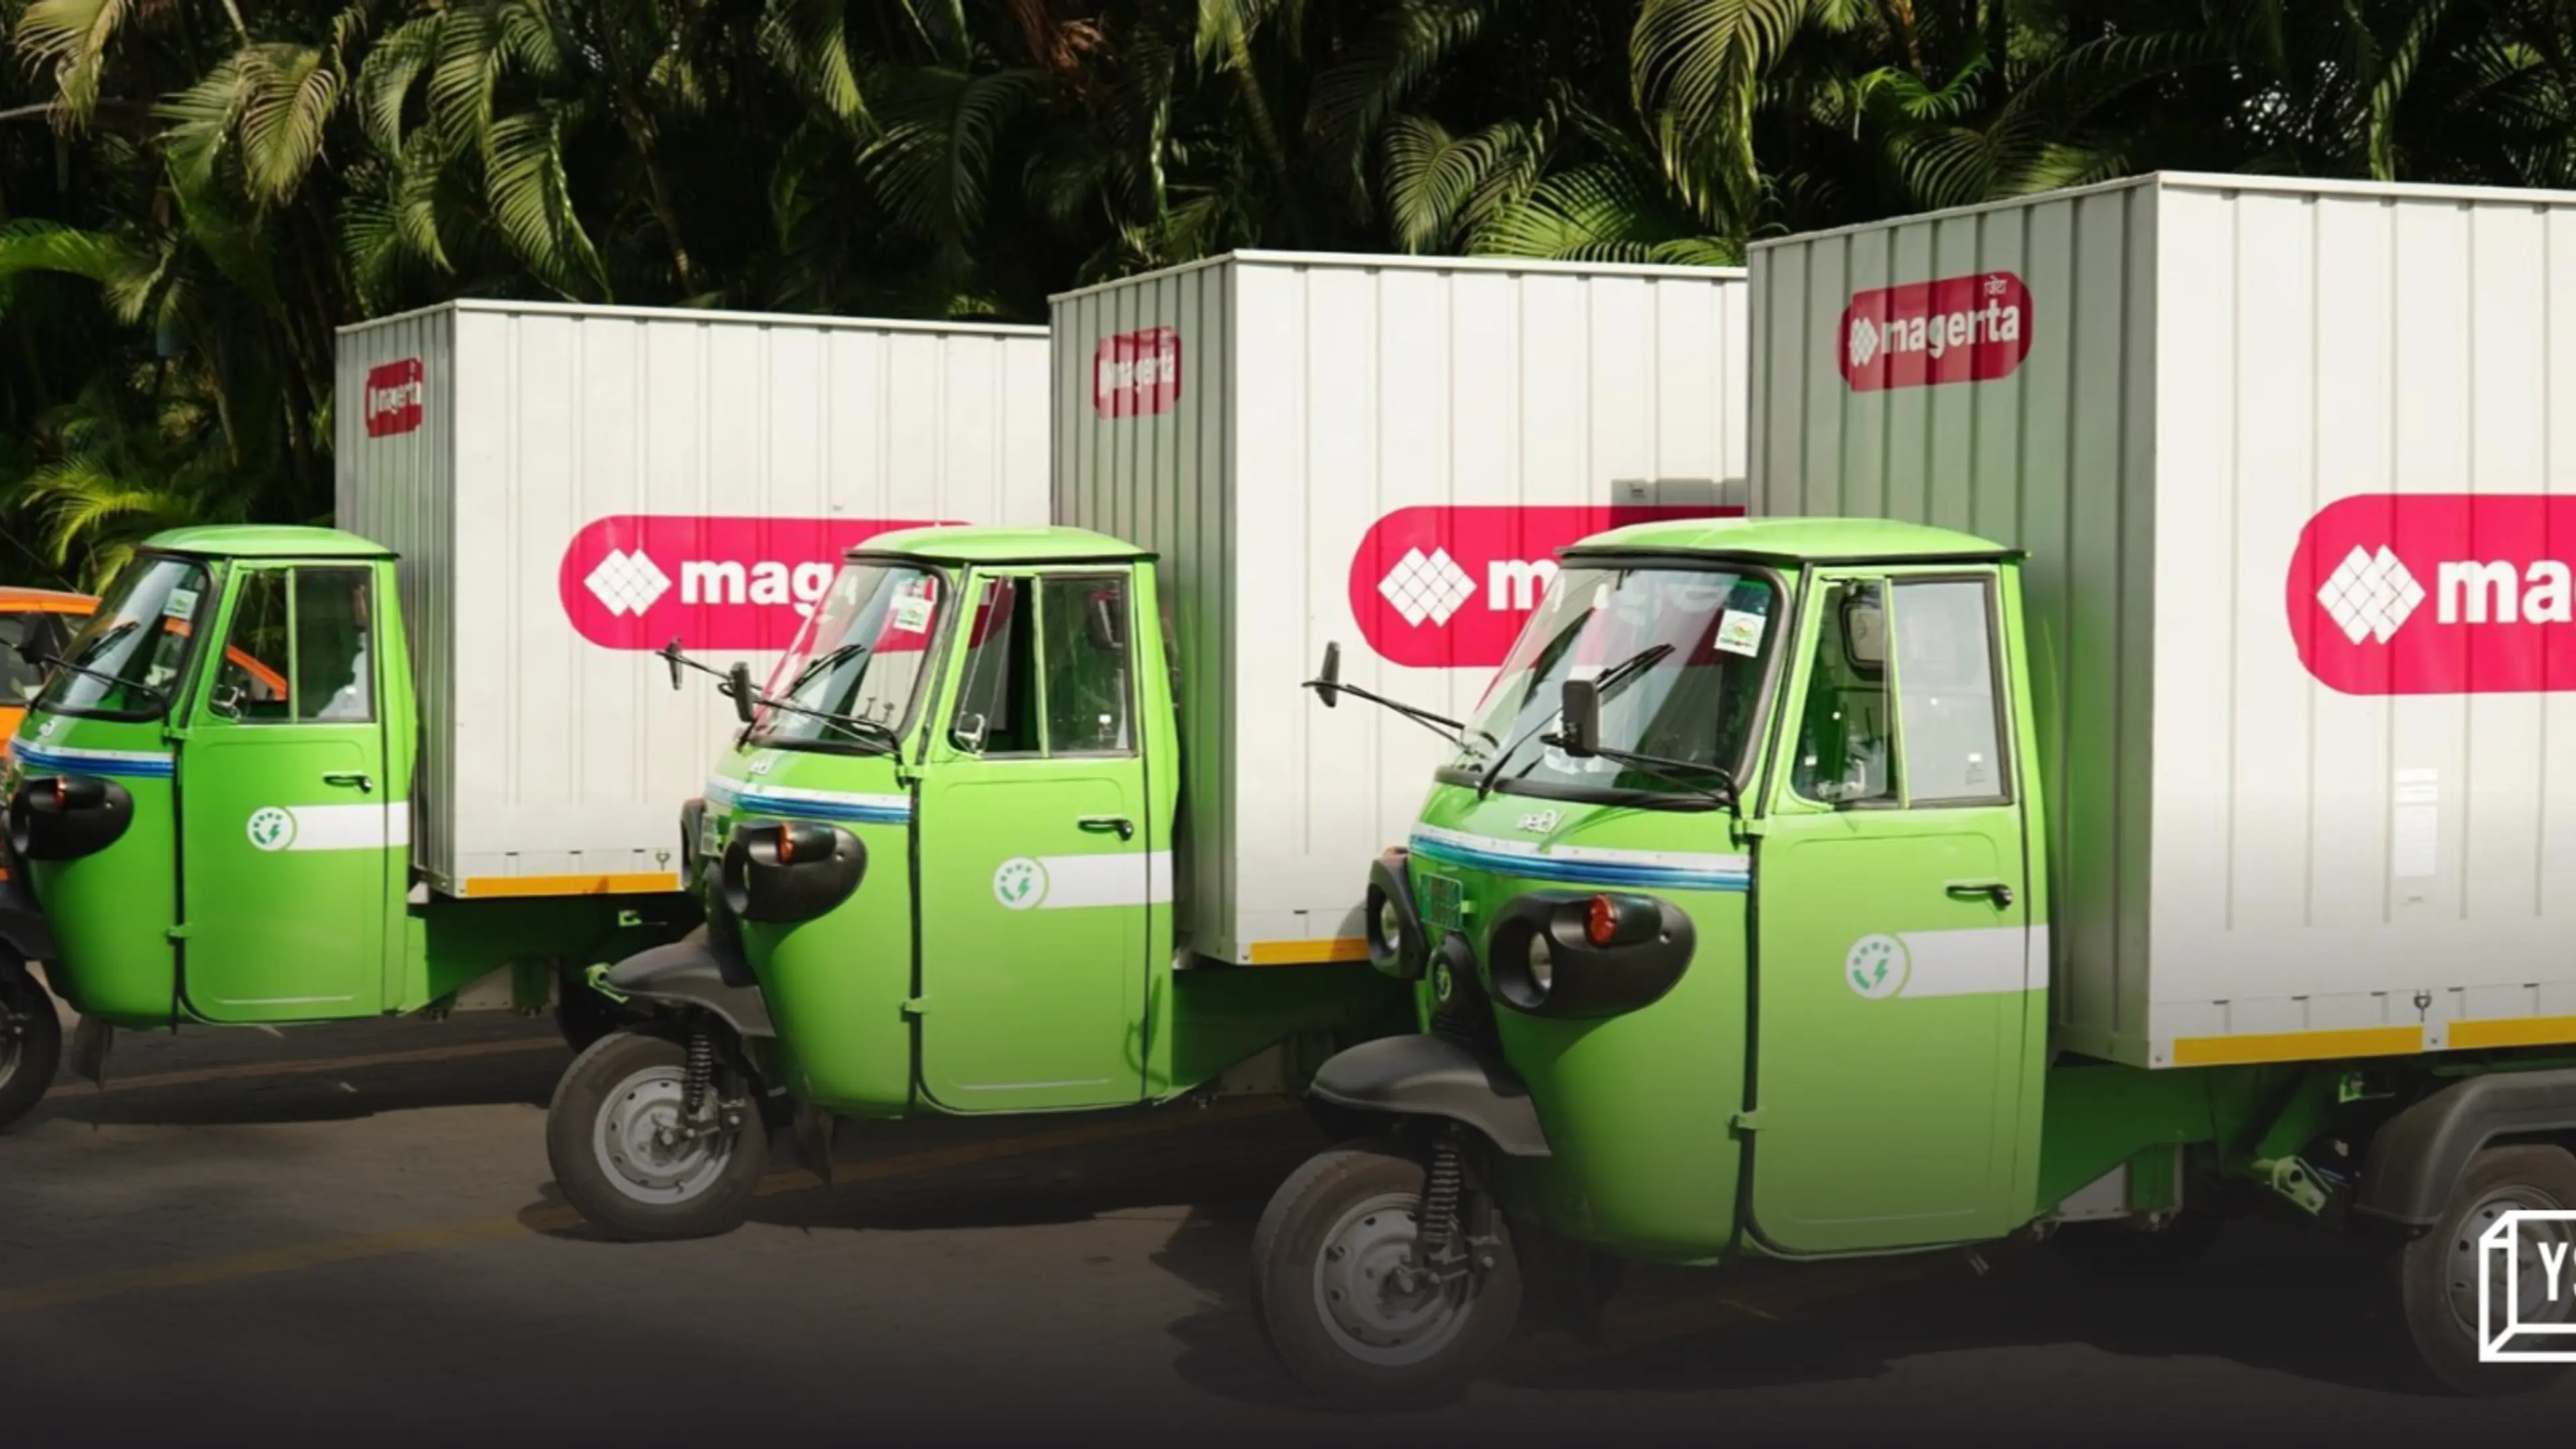 Magenta Mobility raises $22M from bp ventures and Morgan Stanley India Infrastructure